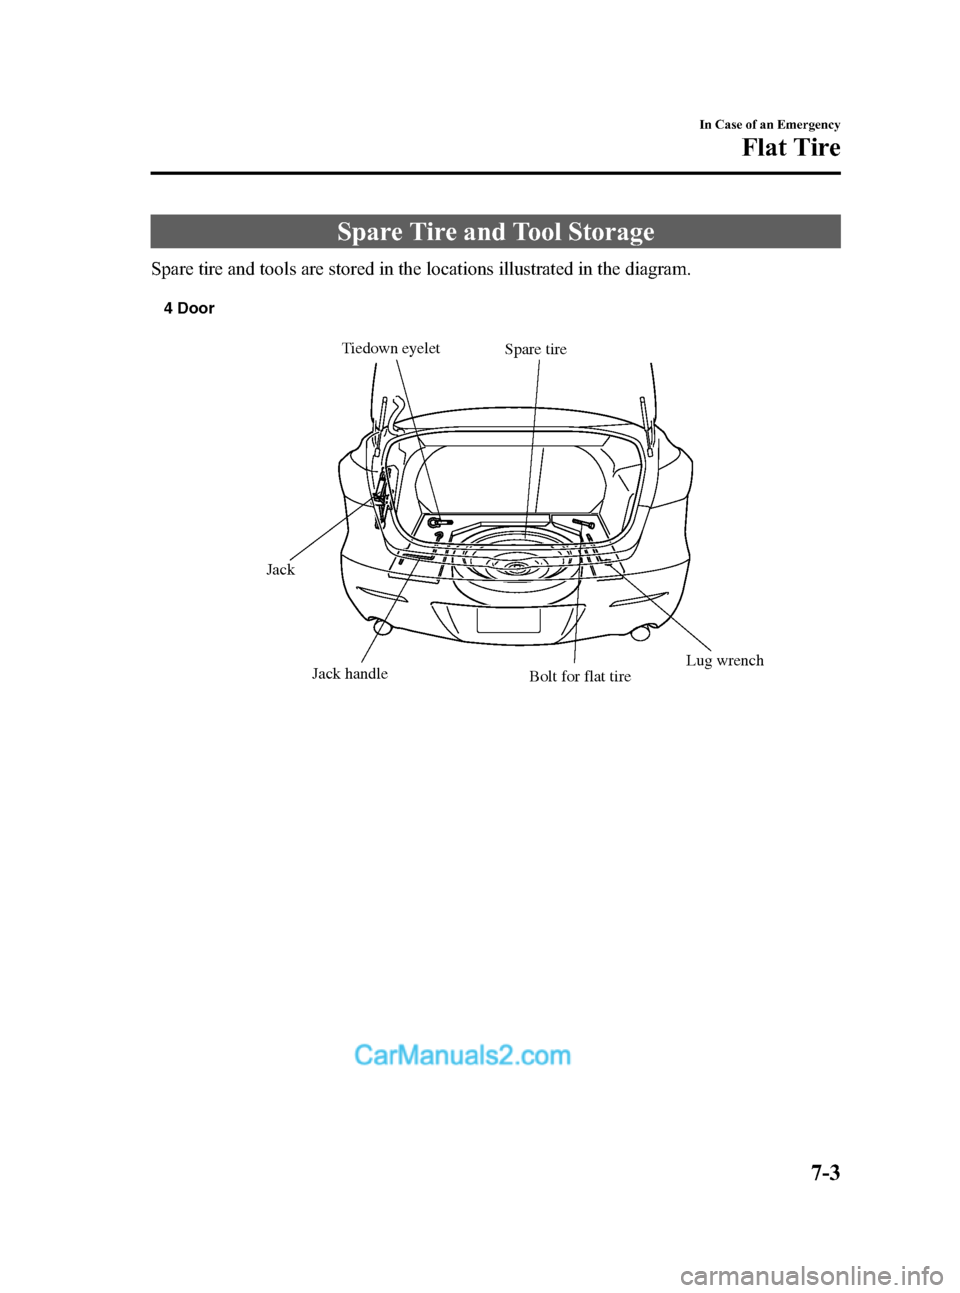 MAZDA MODEL MAZDASPEED 3 2012  Owners Manual (in English) Black plate (349,1)
Spare Tire and Tool Storage
Spare tire and tools are stored in the locations illustrated in the diagram.
Spare tire
Jack
Jack handleTiedown eyelet
Lug wrench
Bolt for flat tire 4 D